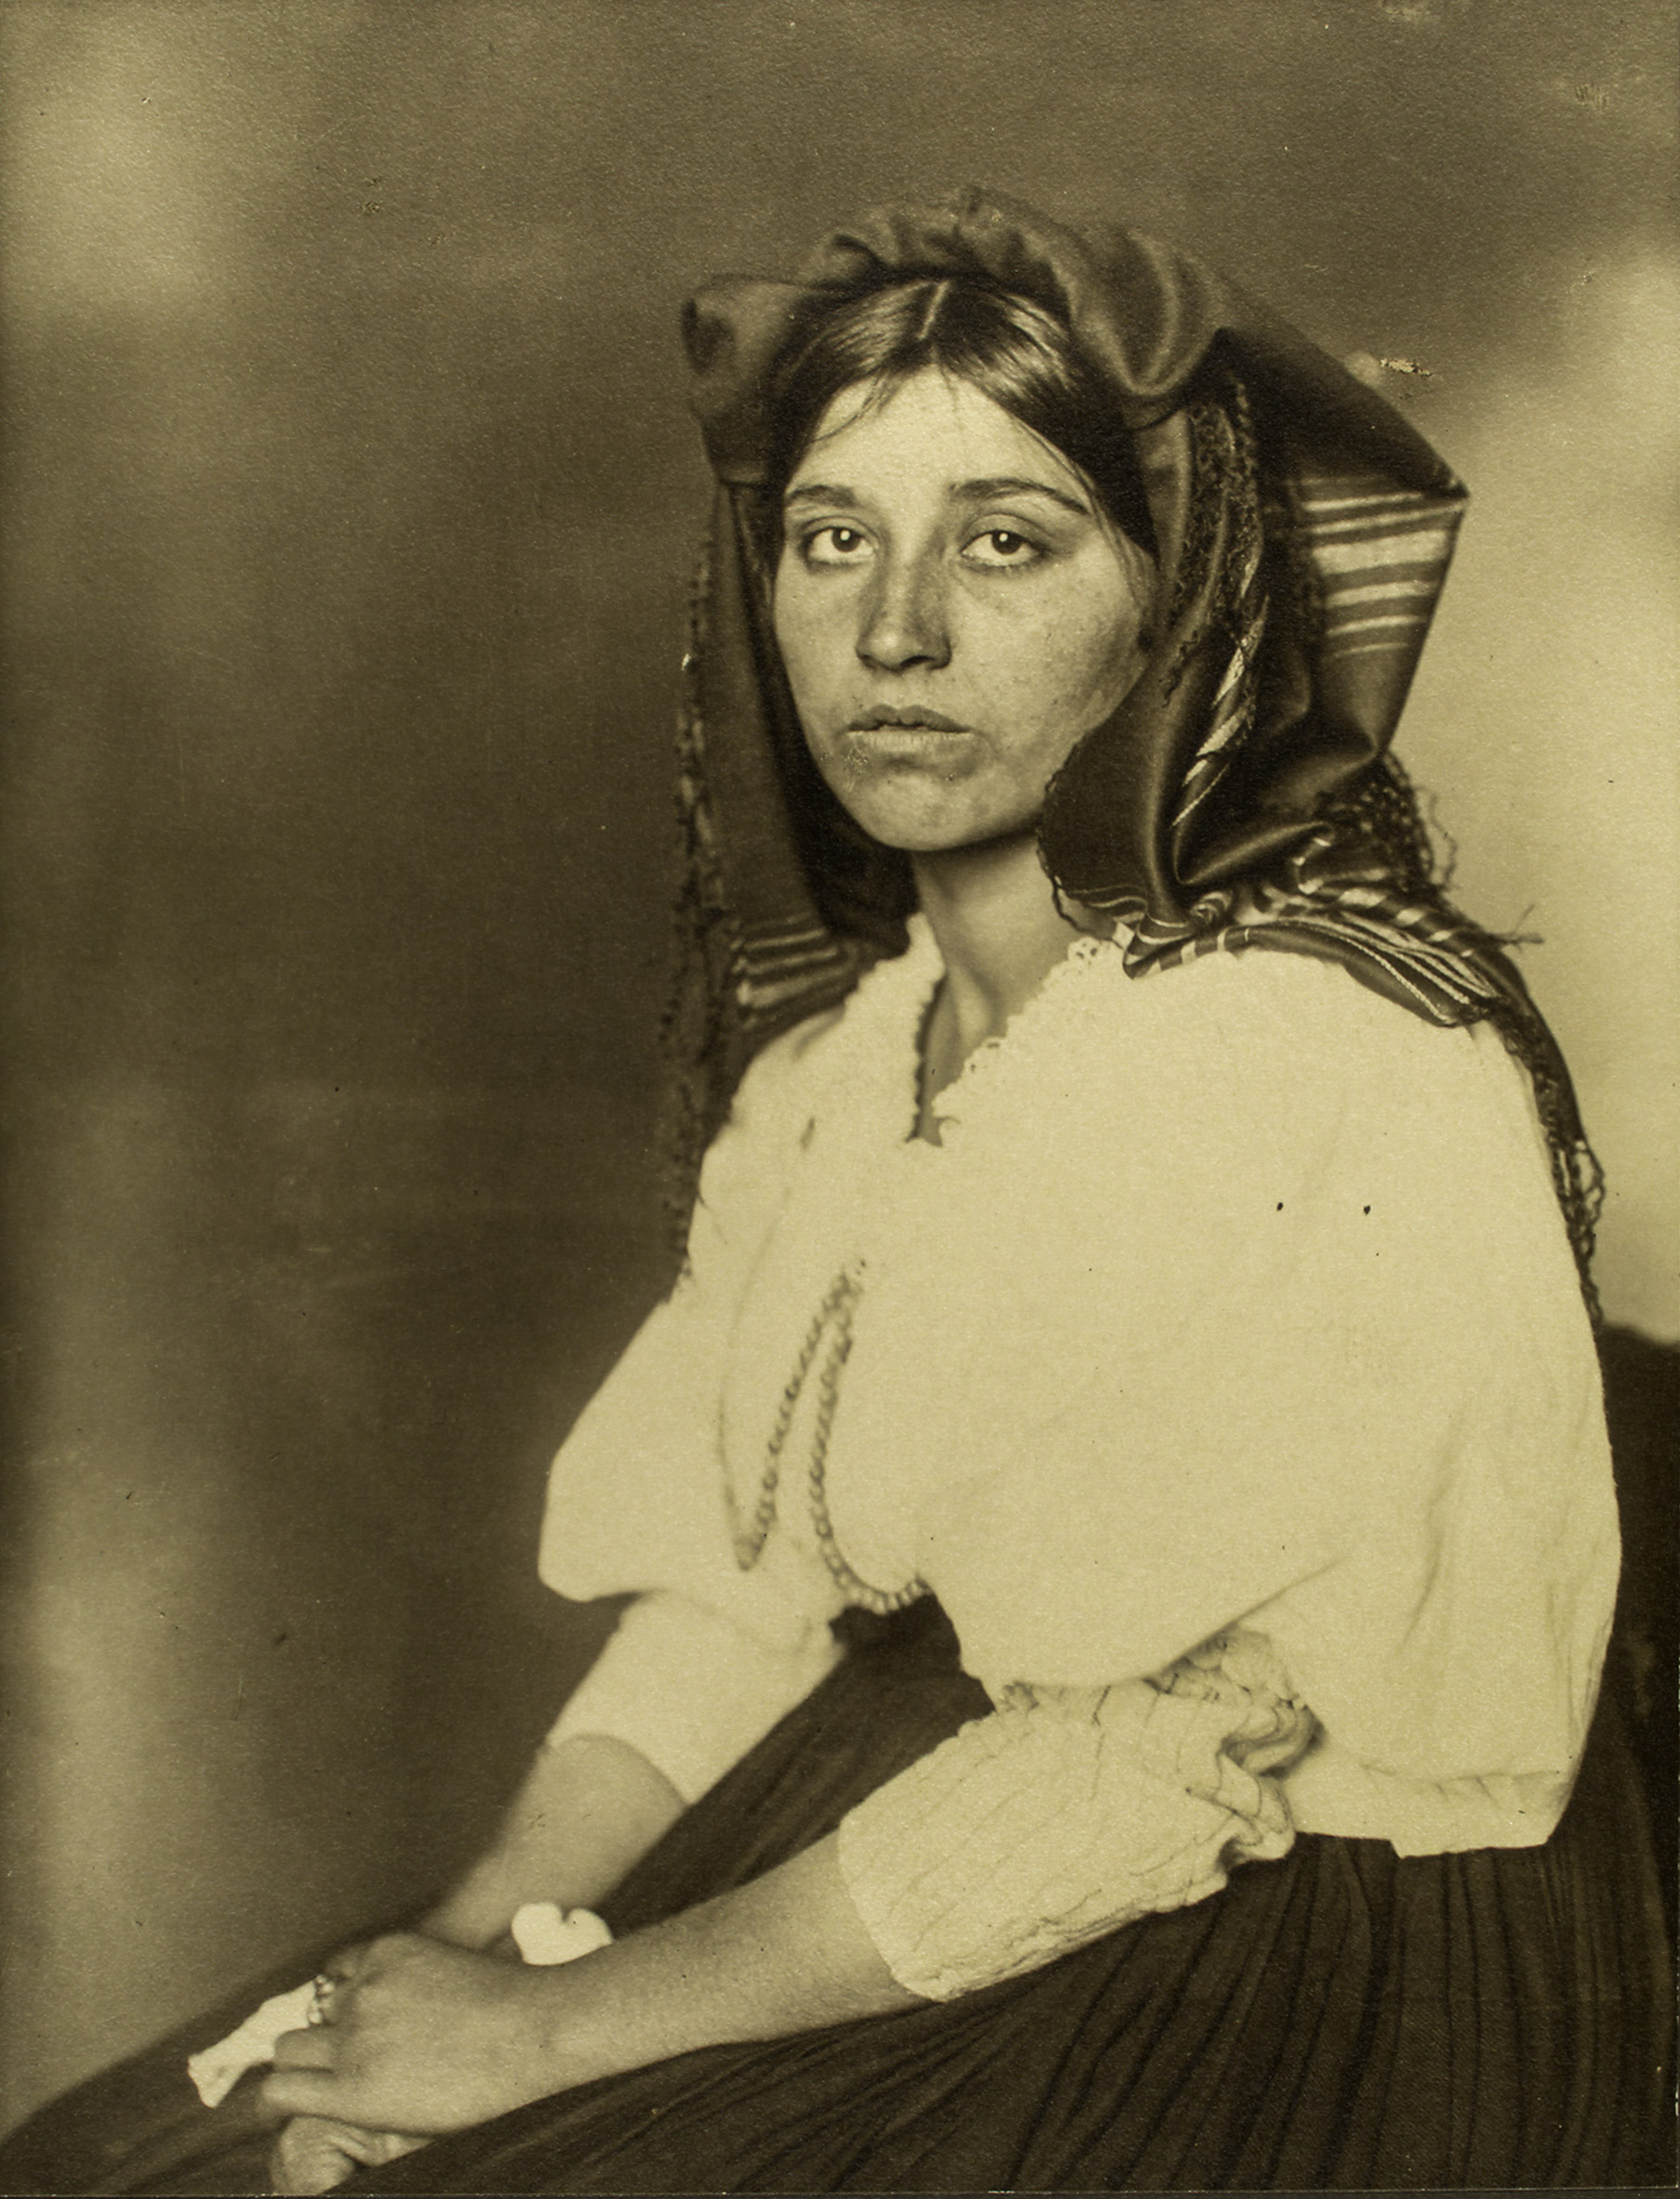 Portrait of an Italian woman at the Ellis Island Immigration Station, 1906.